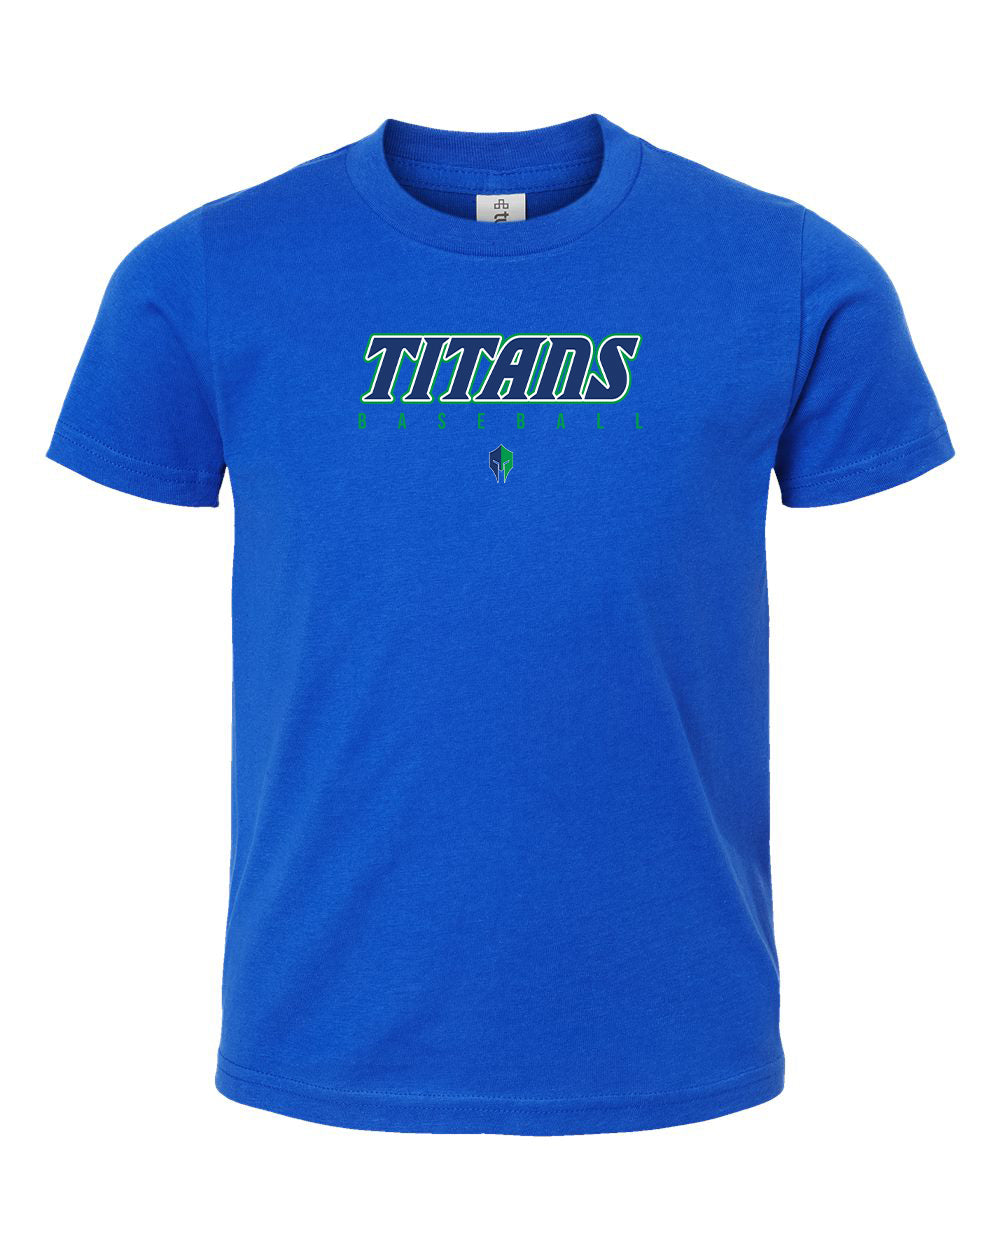 Titans Youth Jersey Tee "Rectangle" - 235 (color options available)